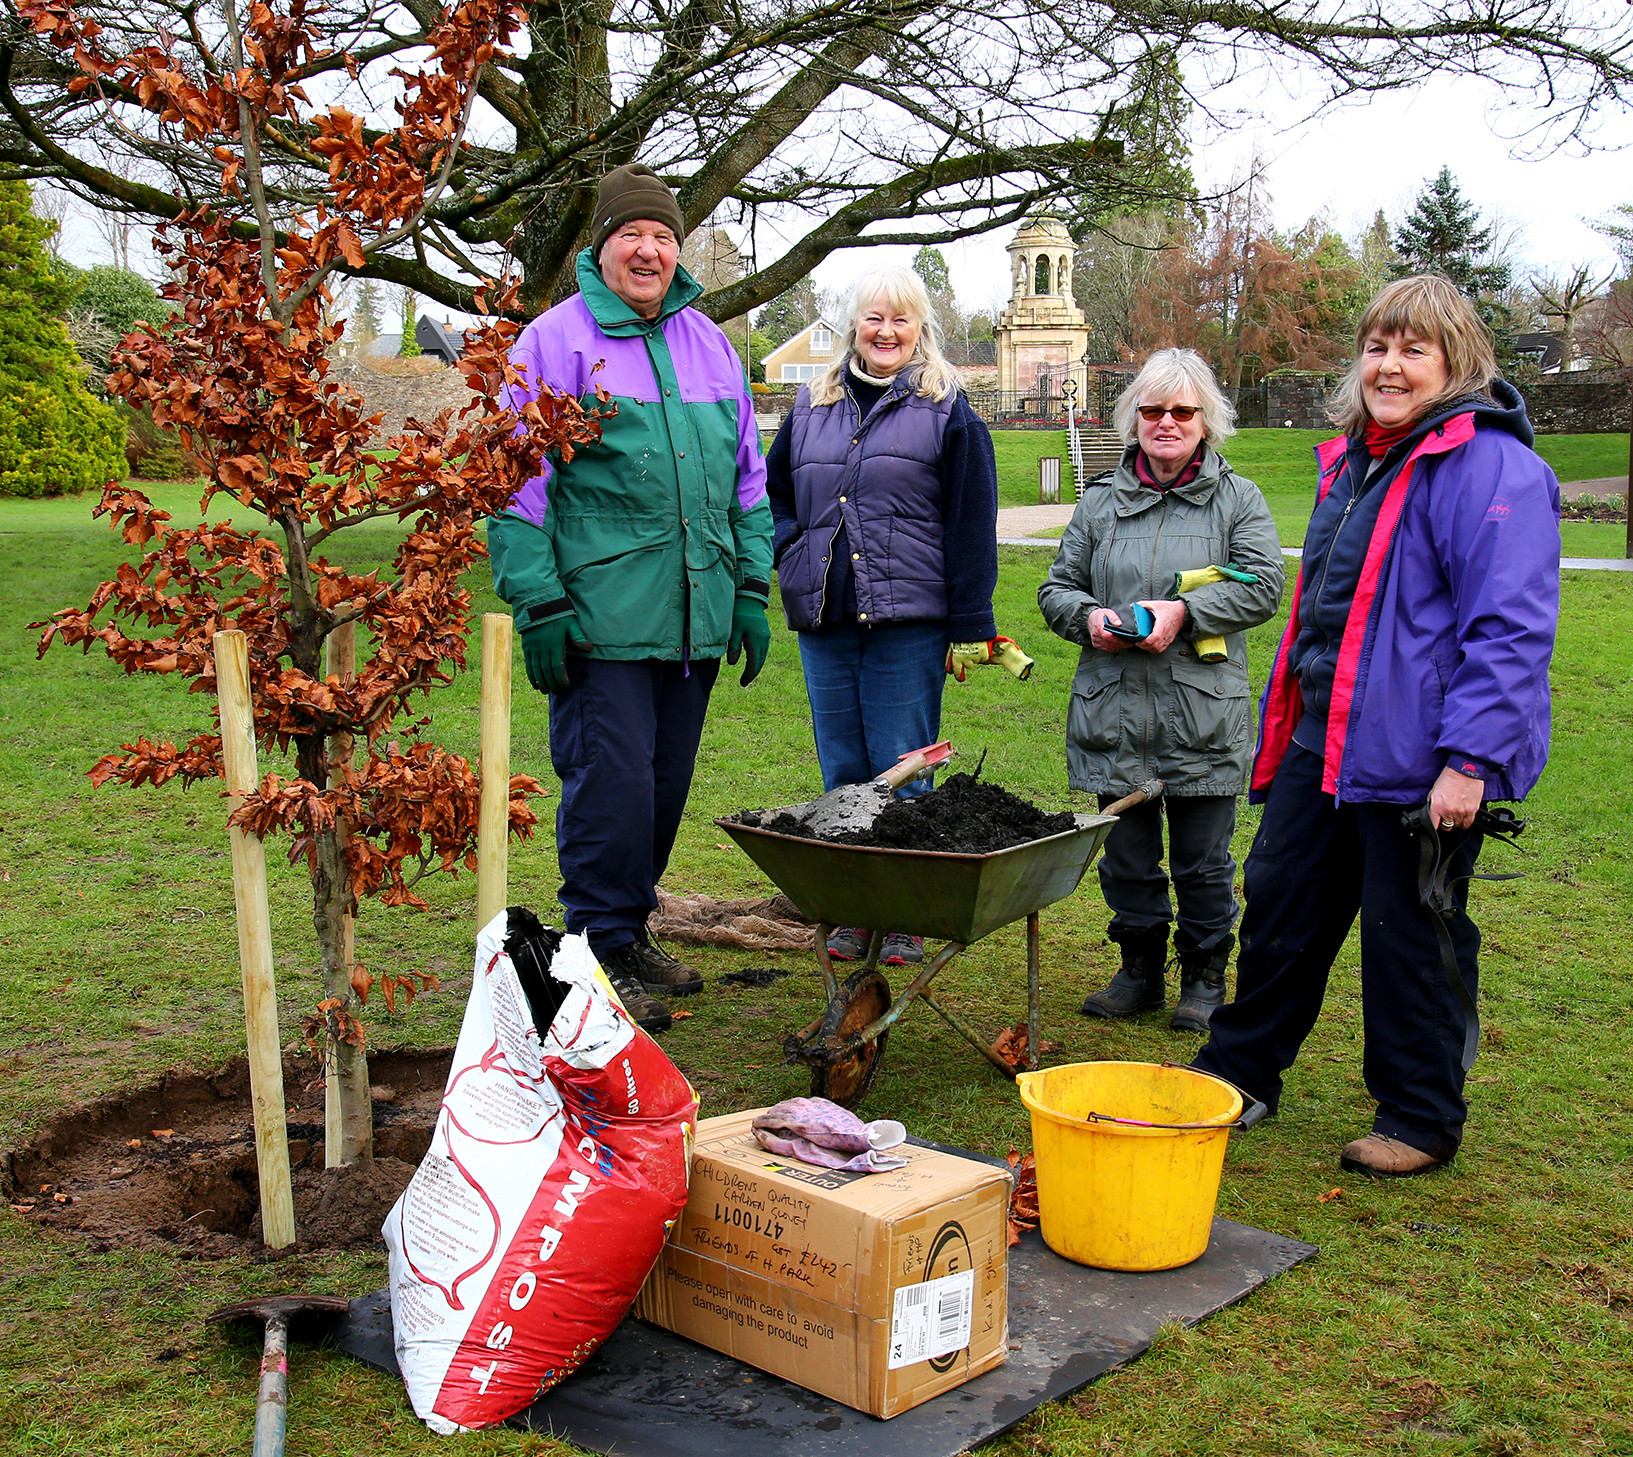 Trustees of the Friends of Hermitage Park - Brian Kyle, Alison Holliman, Jean Walker and Fiona Baker